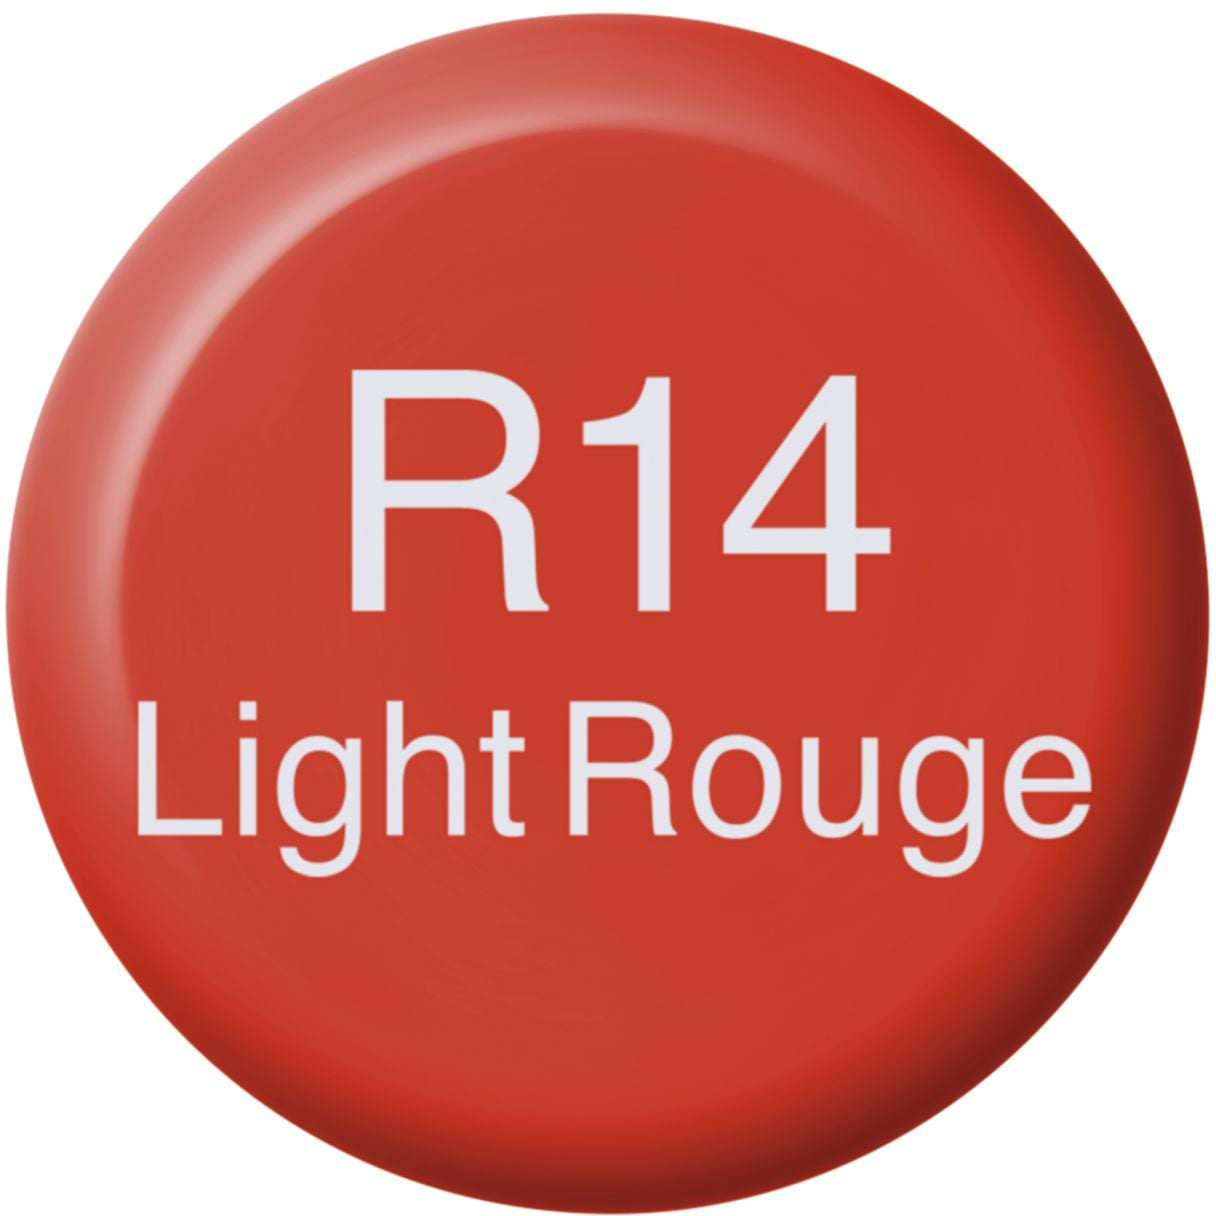 COPIC Ink Refill 21076283 R14 - Light Rouge R14 - Light Rouge